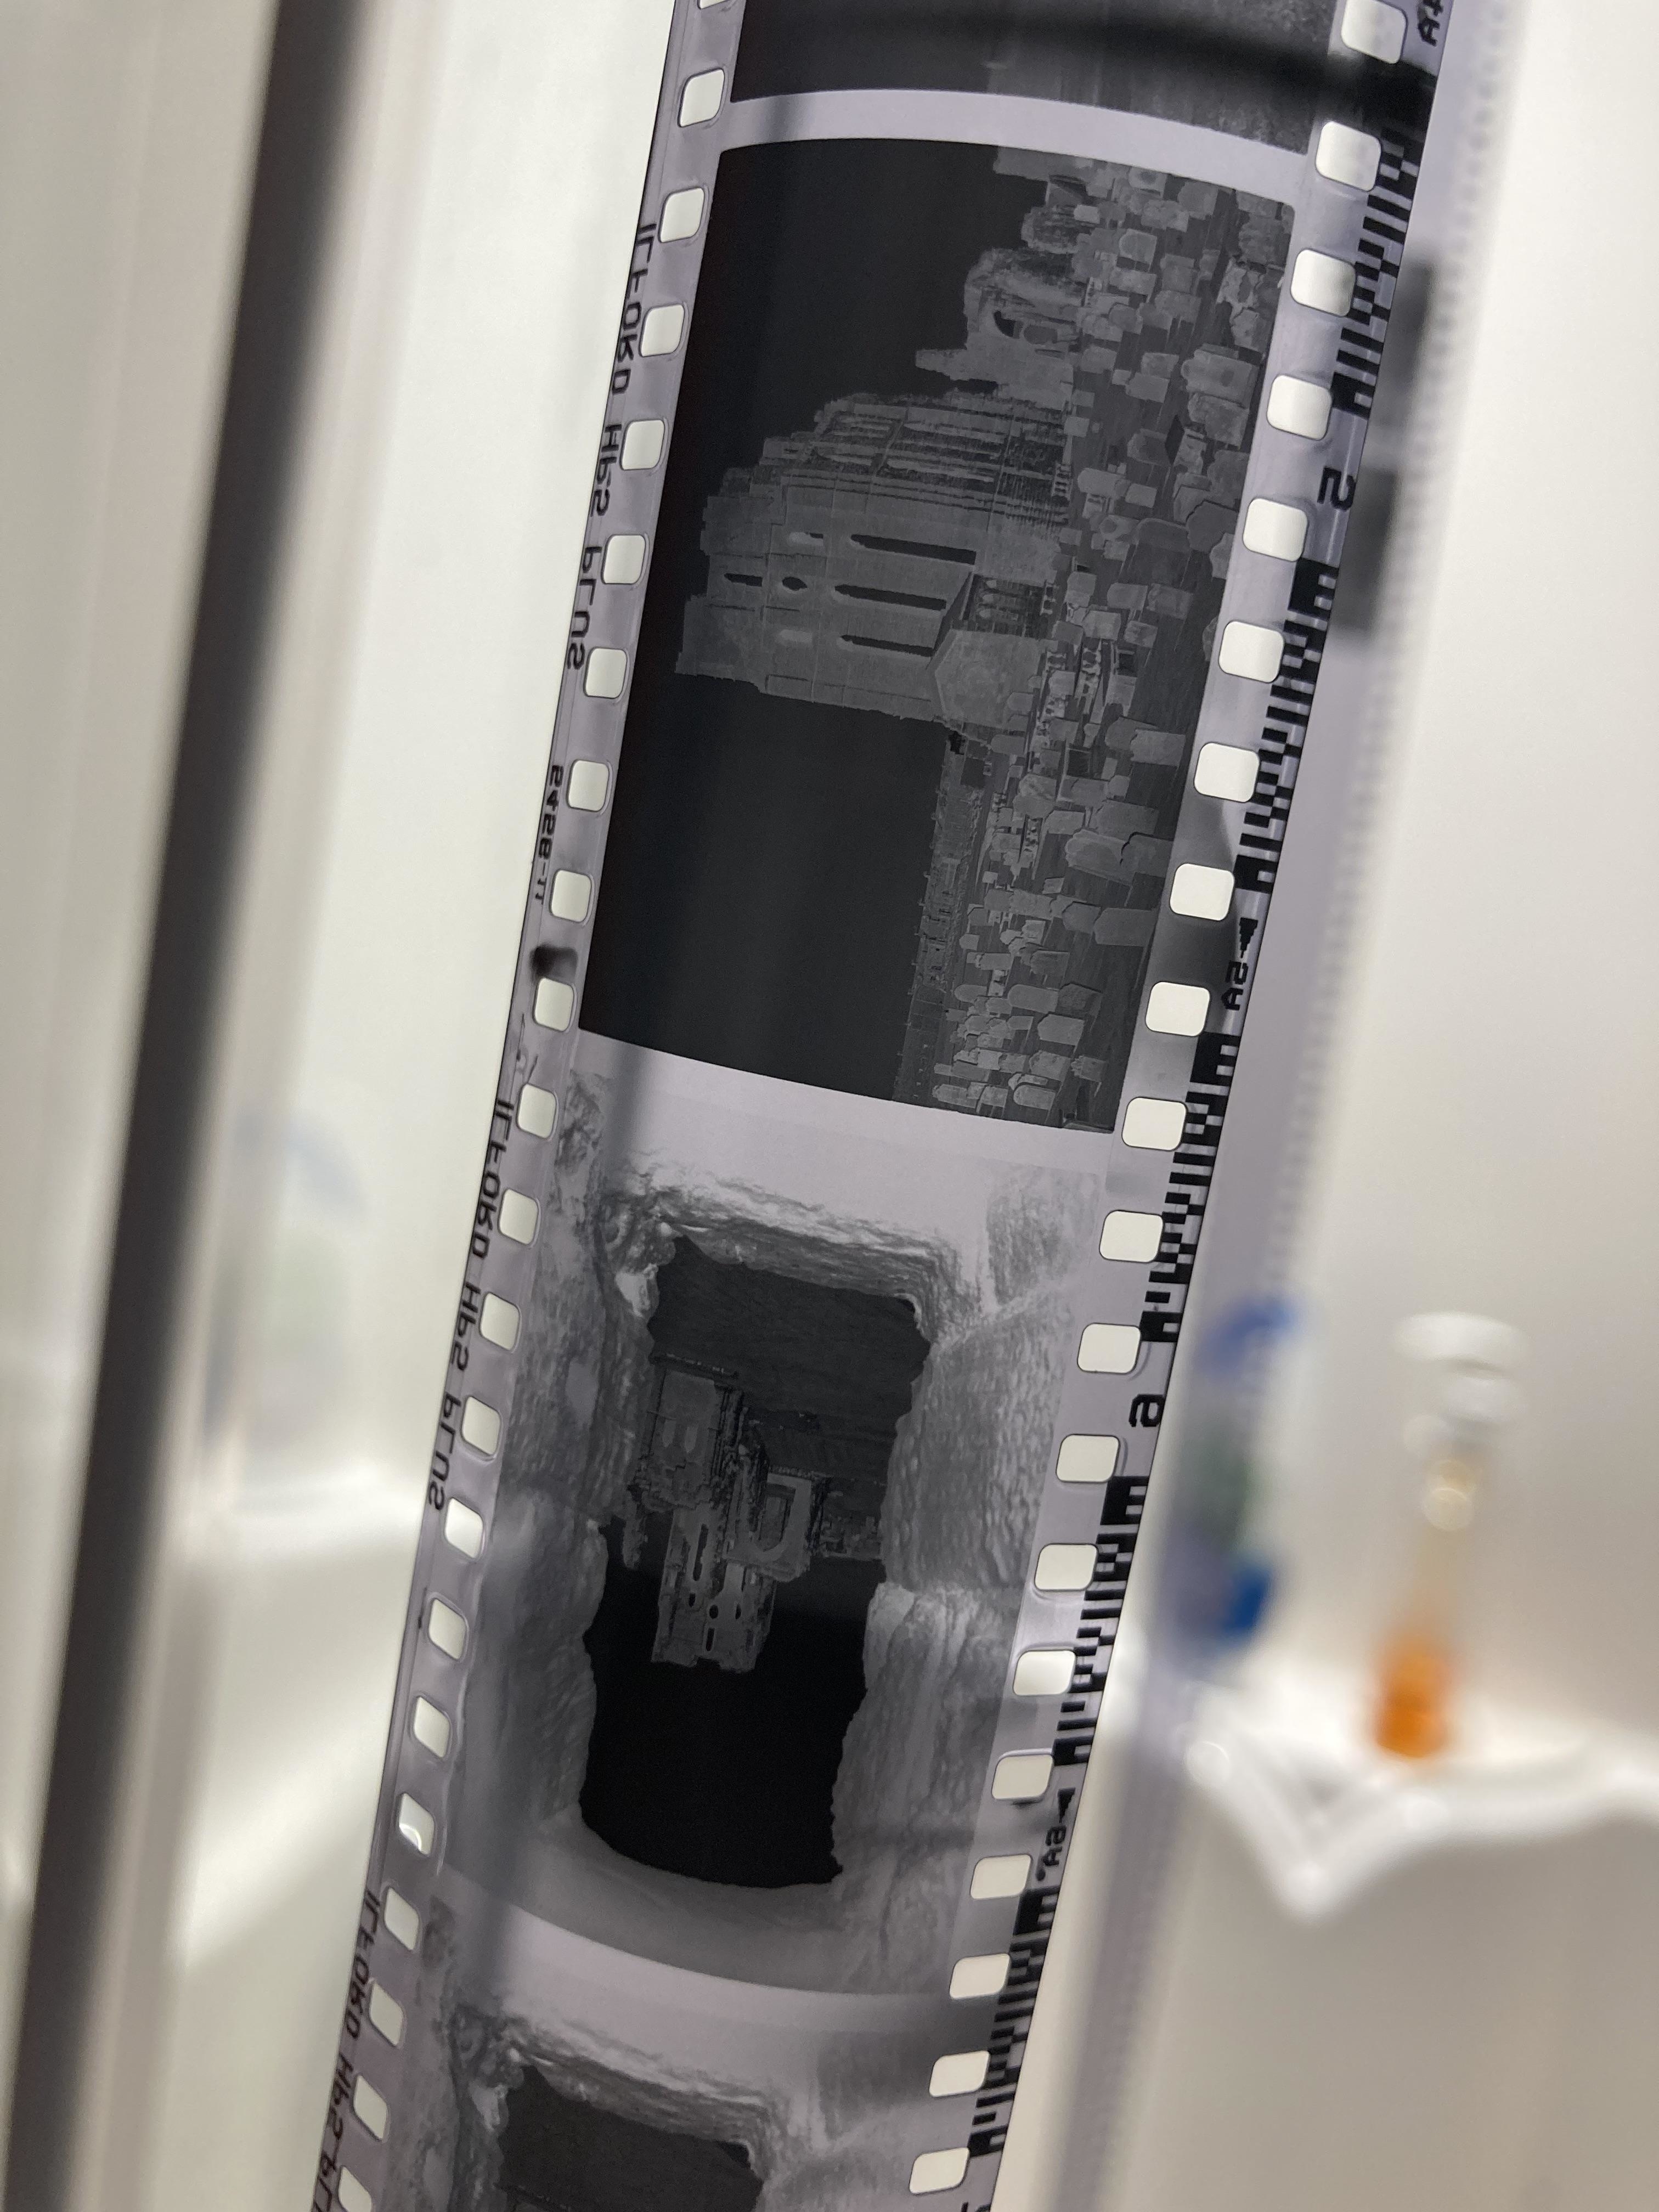 Two strips of film negatives showing pixelated images, likely from a video game, displayed in front of a blurred background